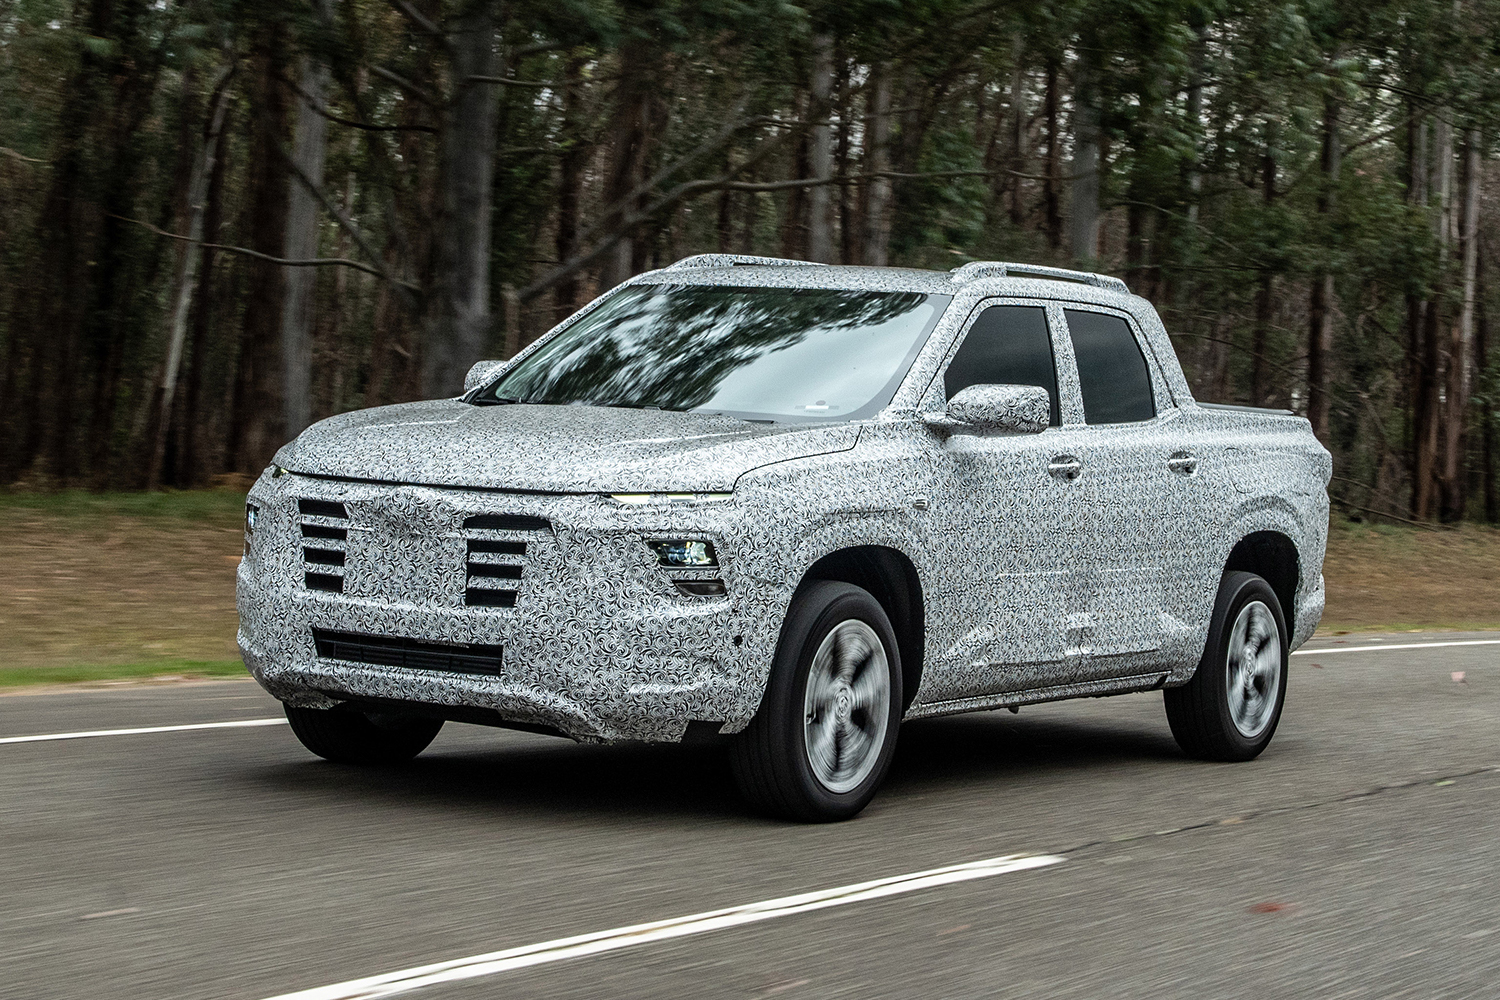 The upcoming 2023 Chevy Montana, a compact pickup truck, testing in Brazil